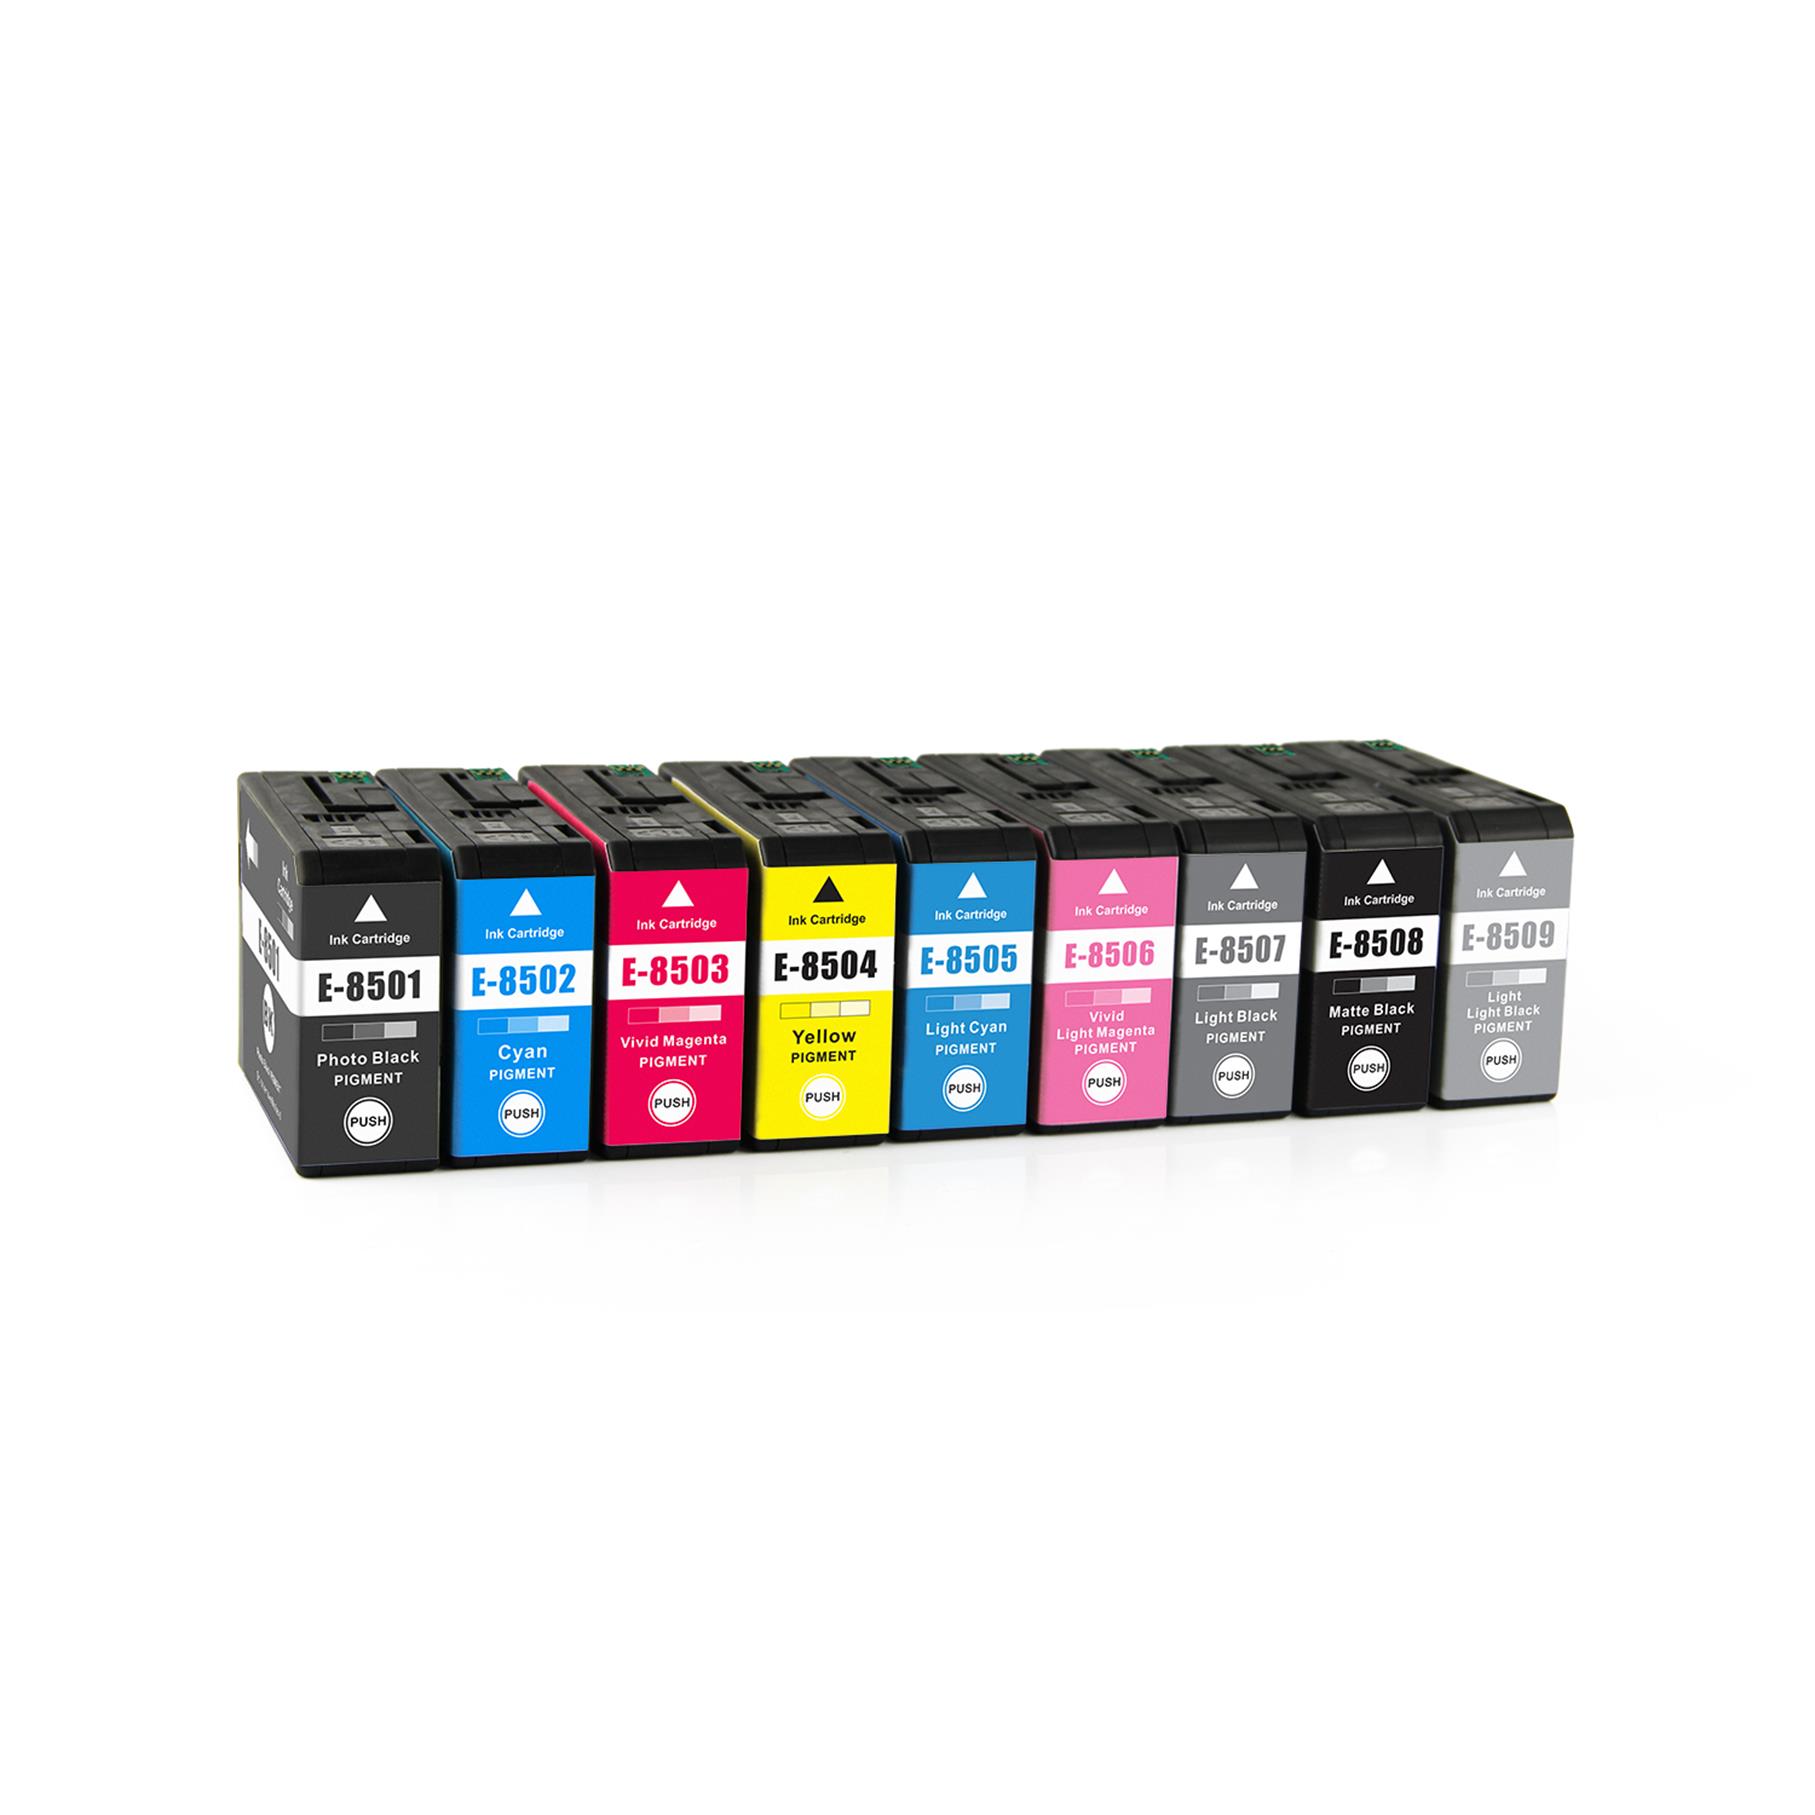 New Compatible Inkjet Cartridge for Epson T8501 - T8509 with Pigment Ink